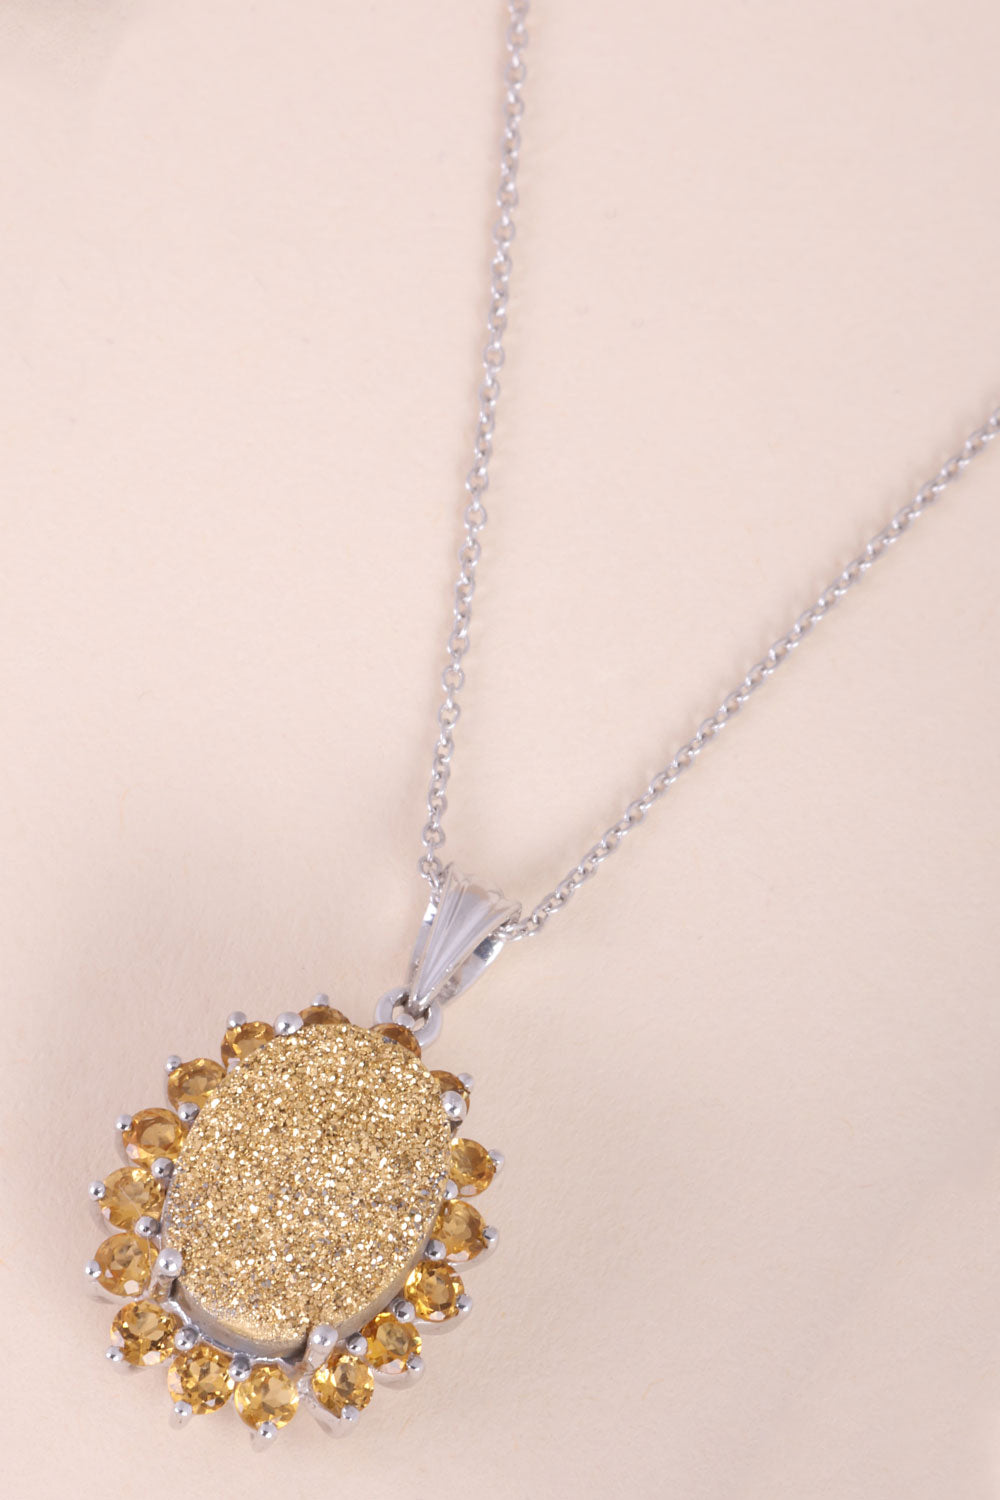 Drusy Golden With Citrine Sterling Silver Necklace Pendant Chain - Avishya